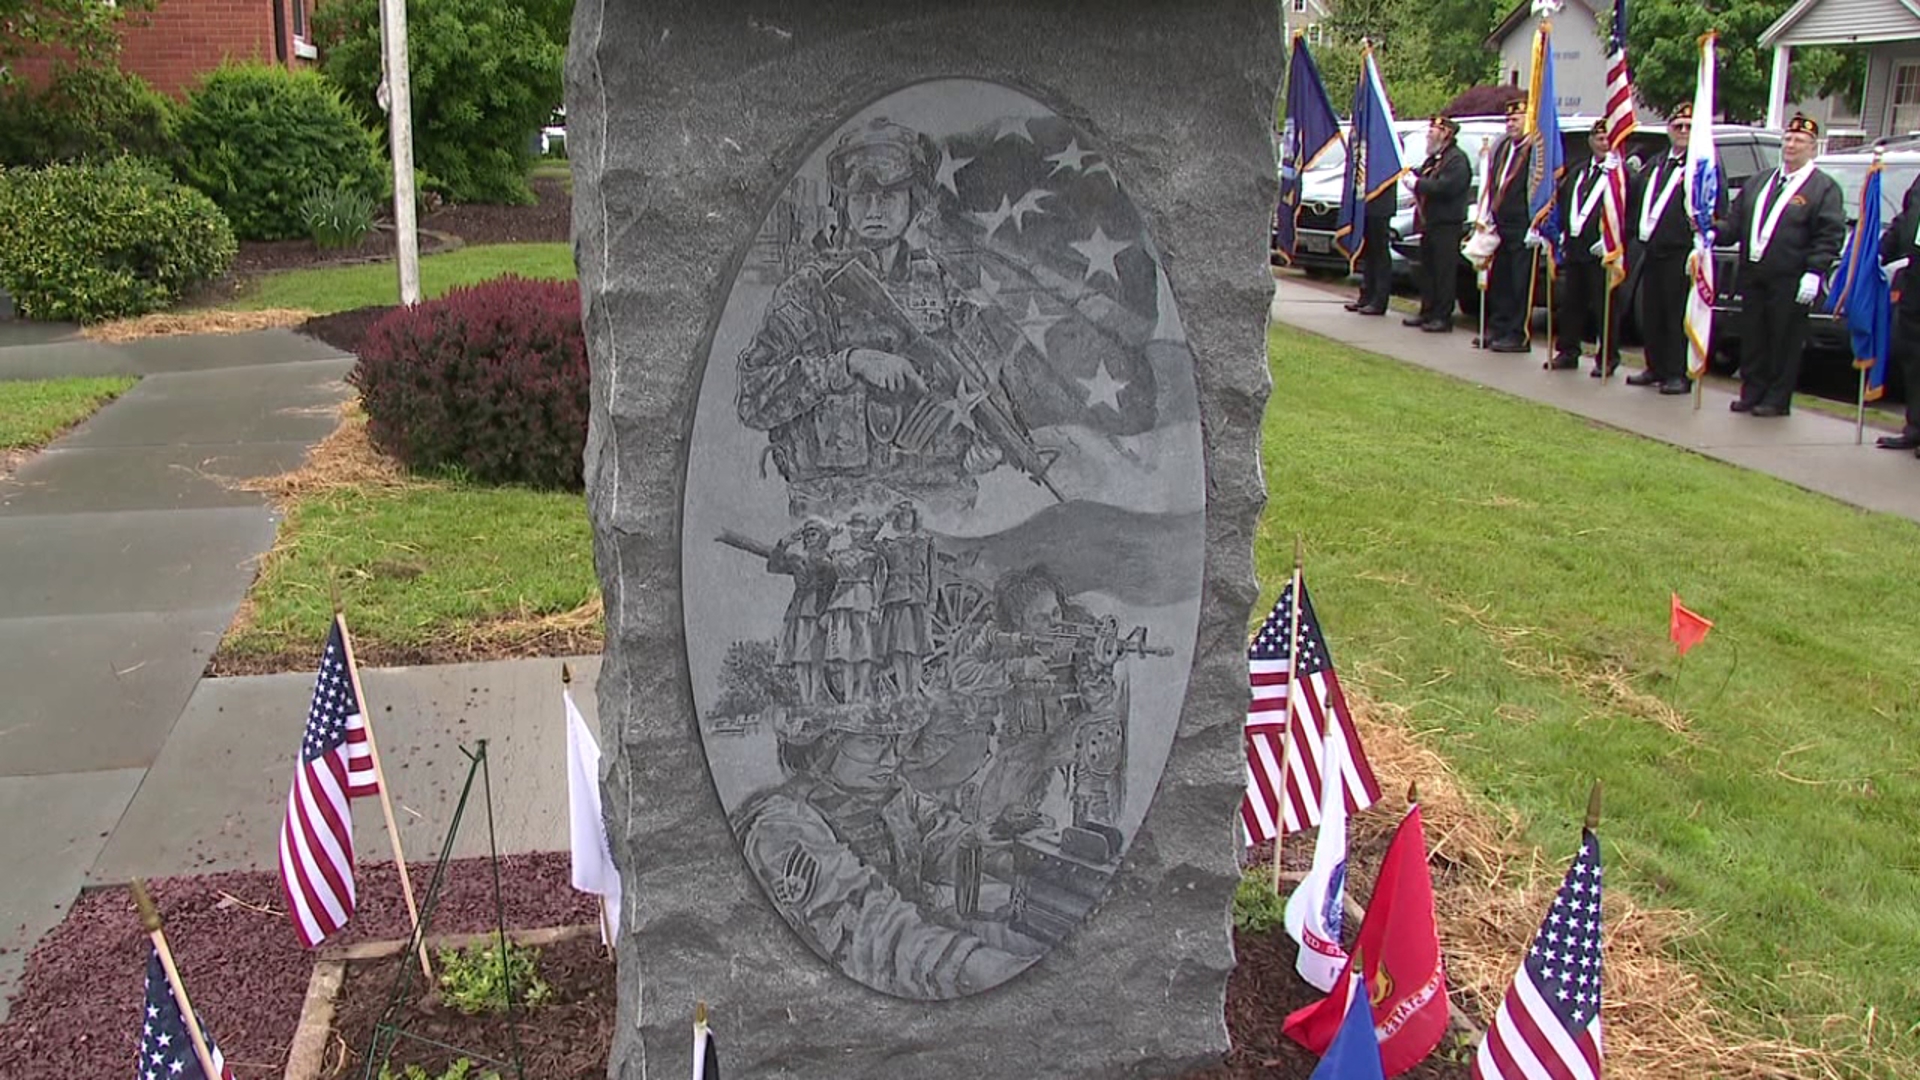 A monument dedication ceremony honoring women in the military was held at the Wayne County Courthouse on Saturday.